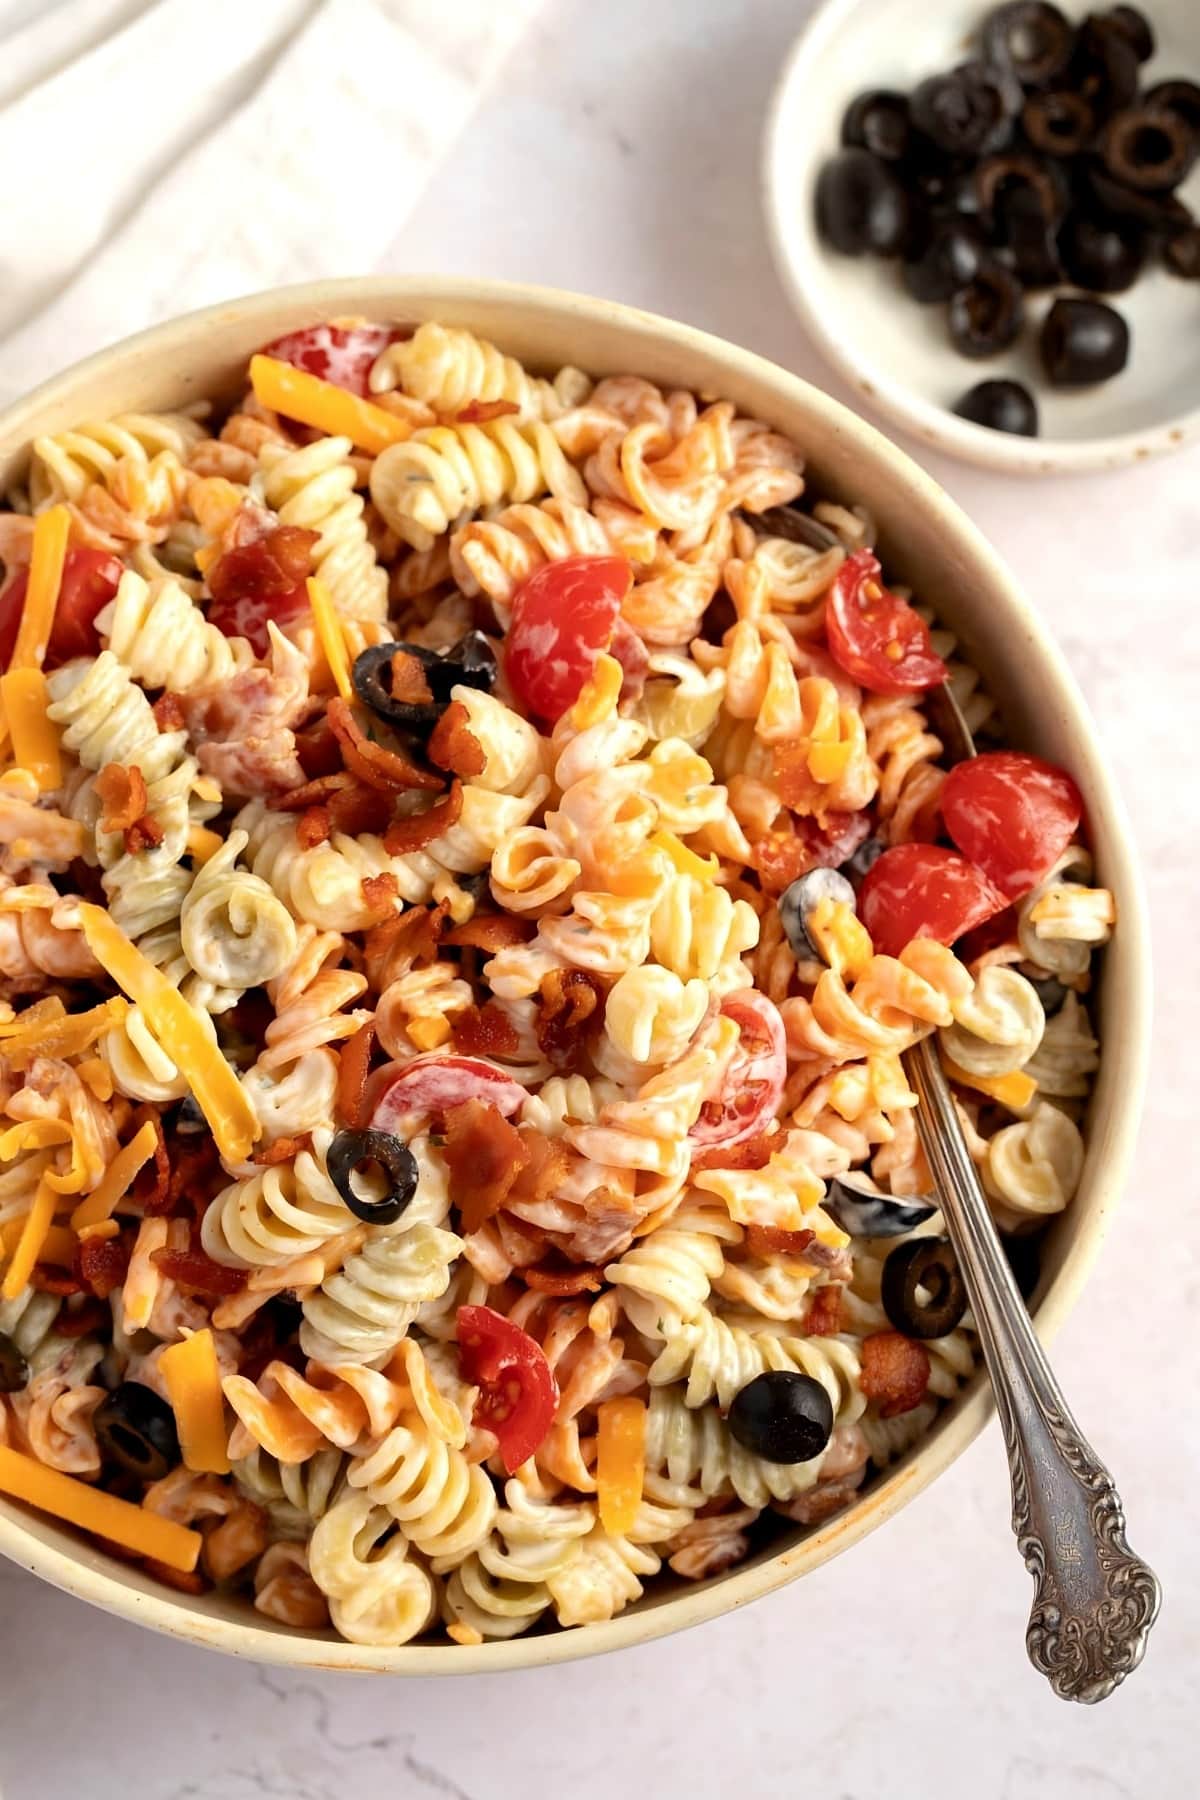 Top view of a bowl of rotini salad with bacon, mayonnaise, milk, tomato, black olives and cheese.